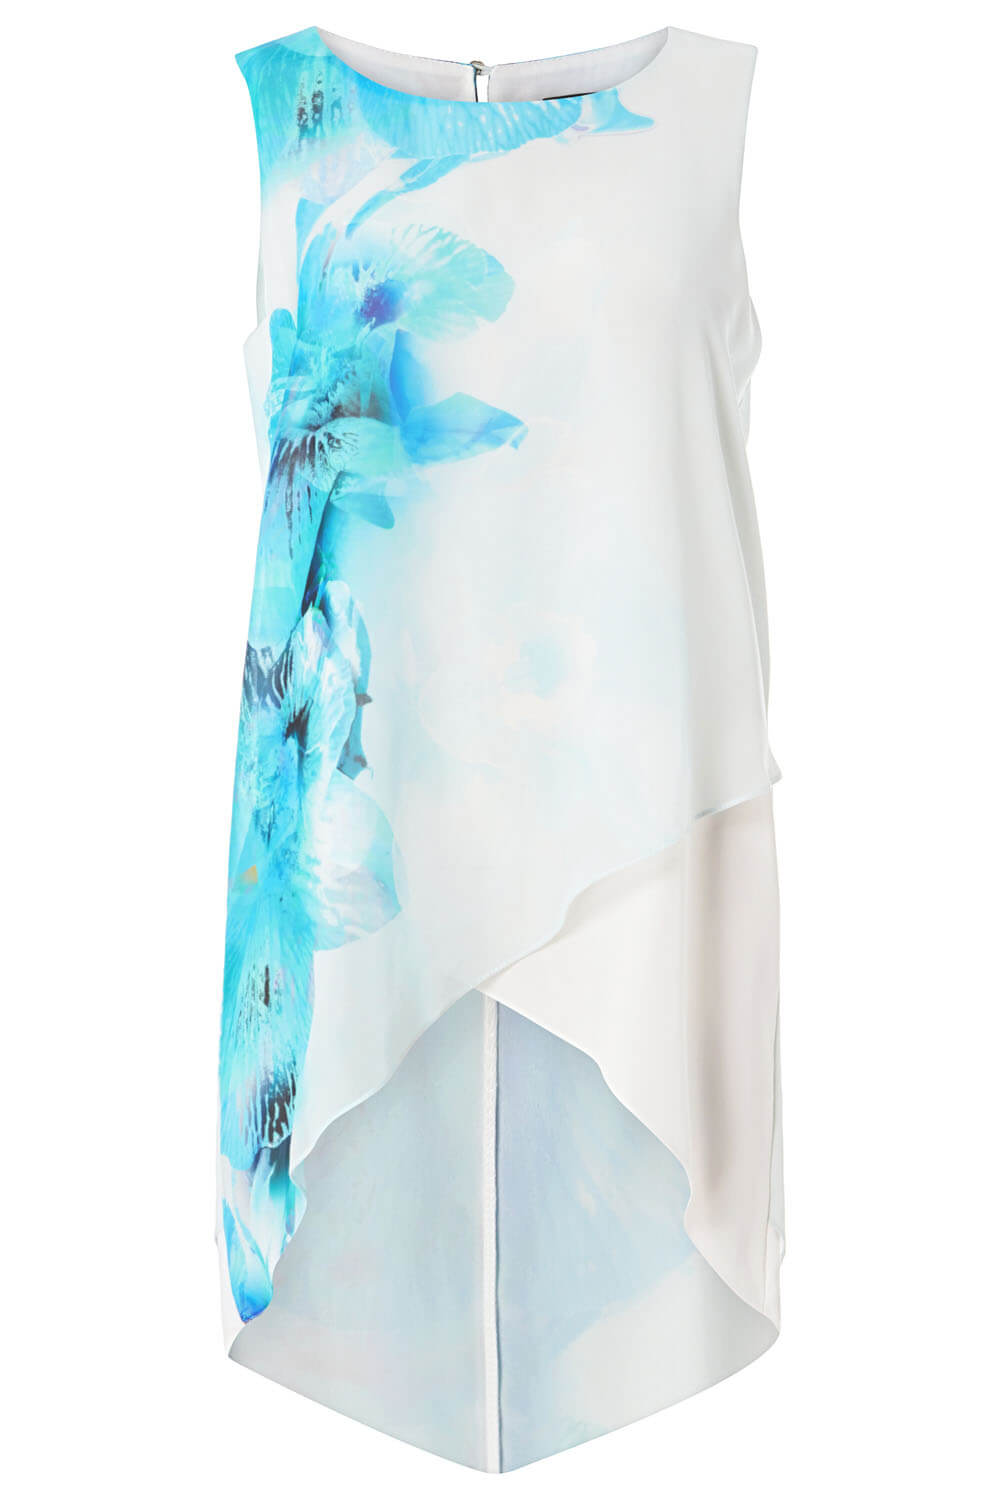 Turquoise Floral Print Asymmetric Chiffon Top , Image 5 of 5